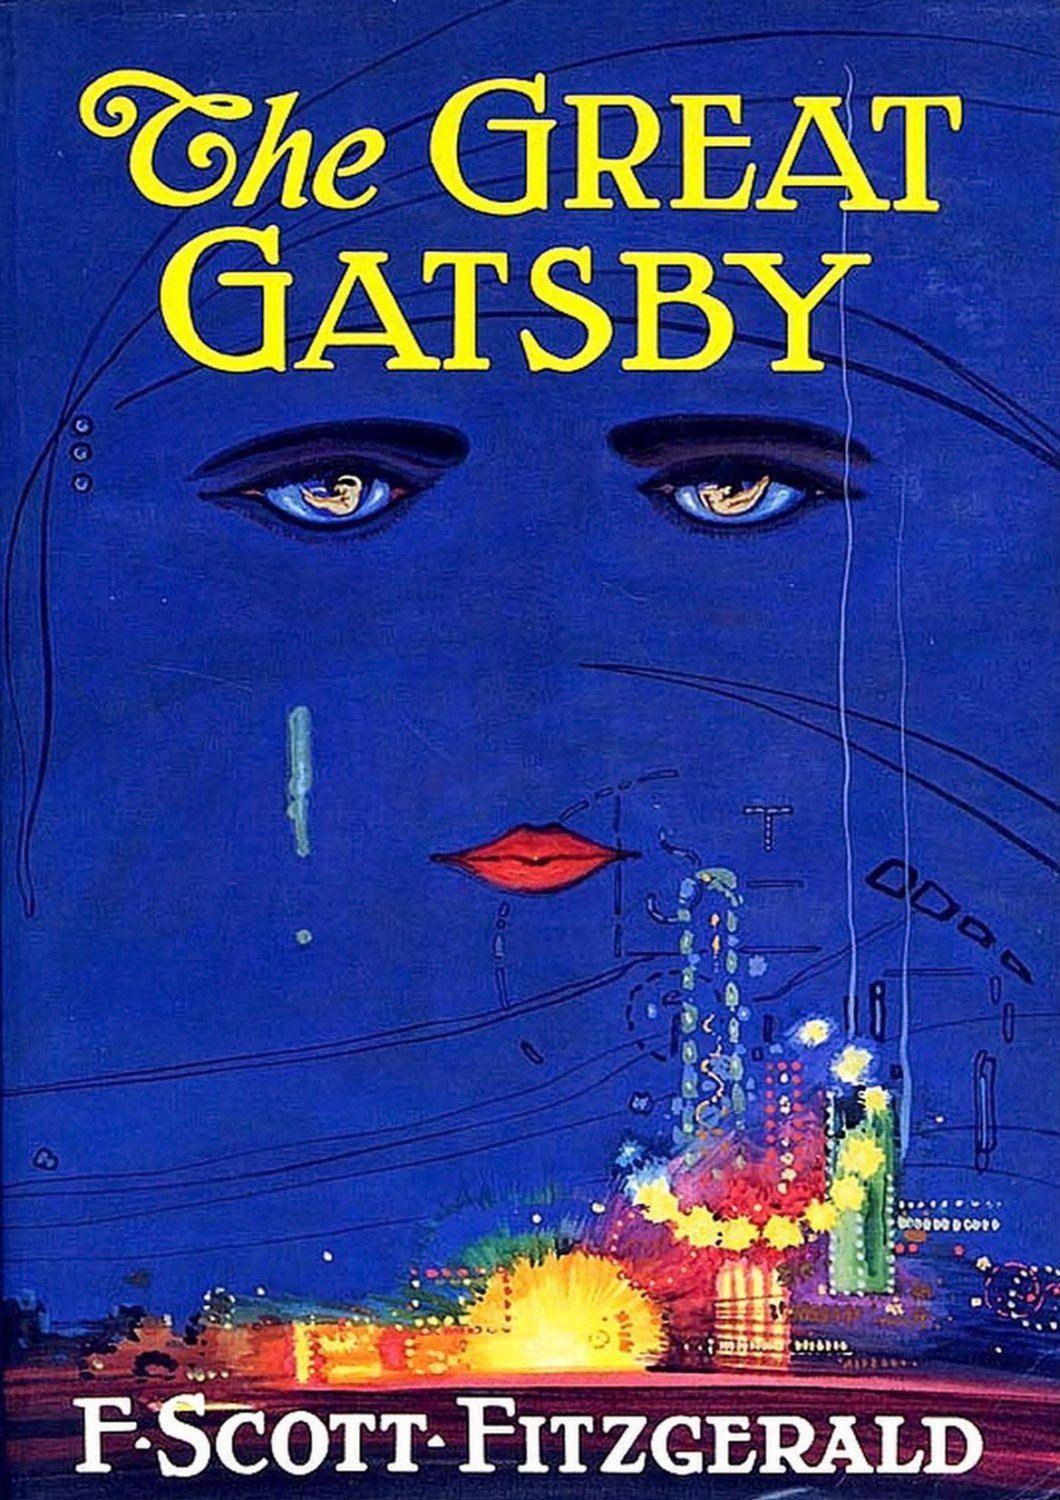 GREAT GATSBY POSTER: Vintage Fitzgerald Book Cover Art Print - Pimlico Prints